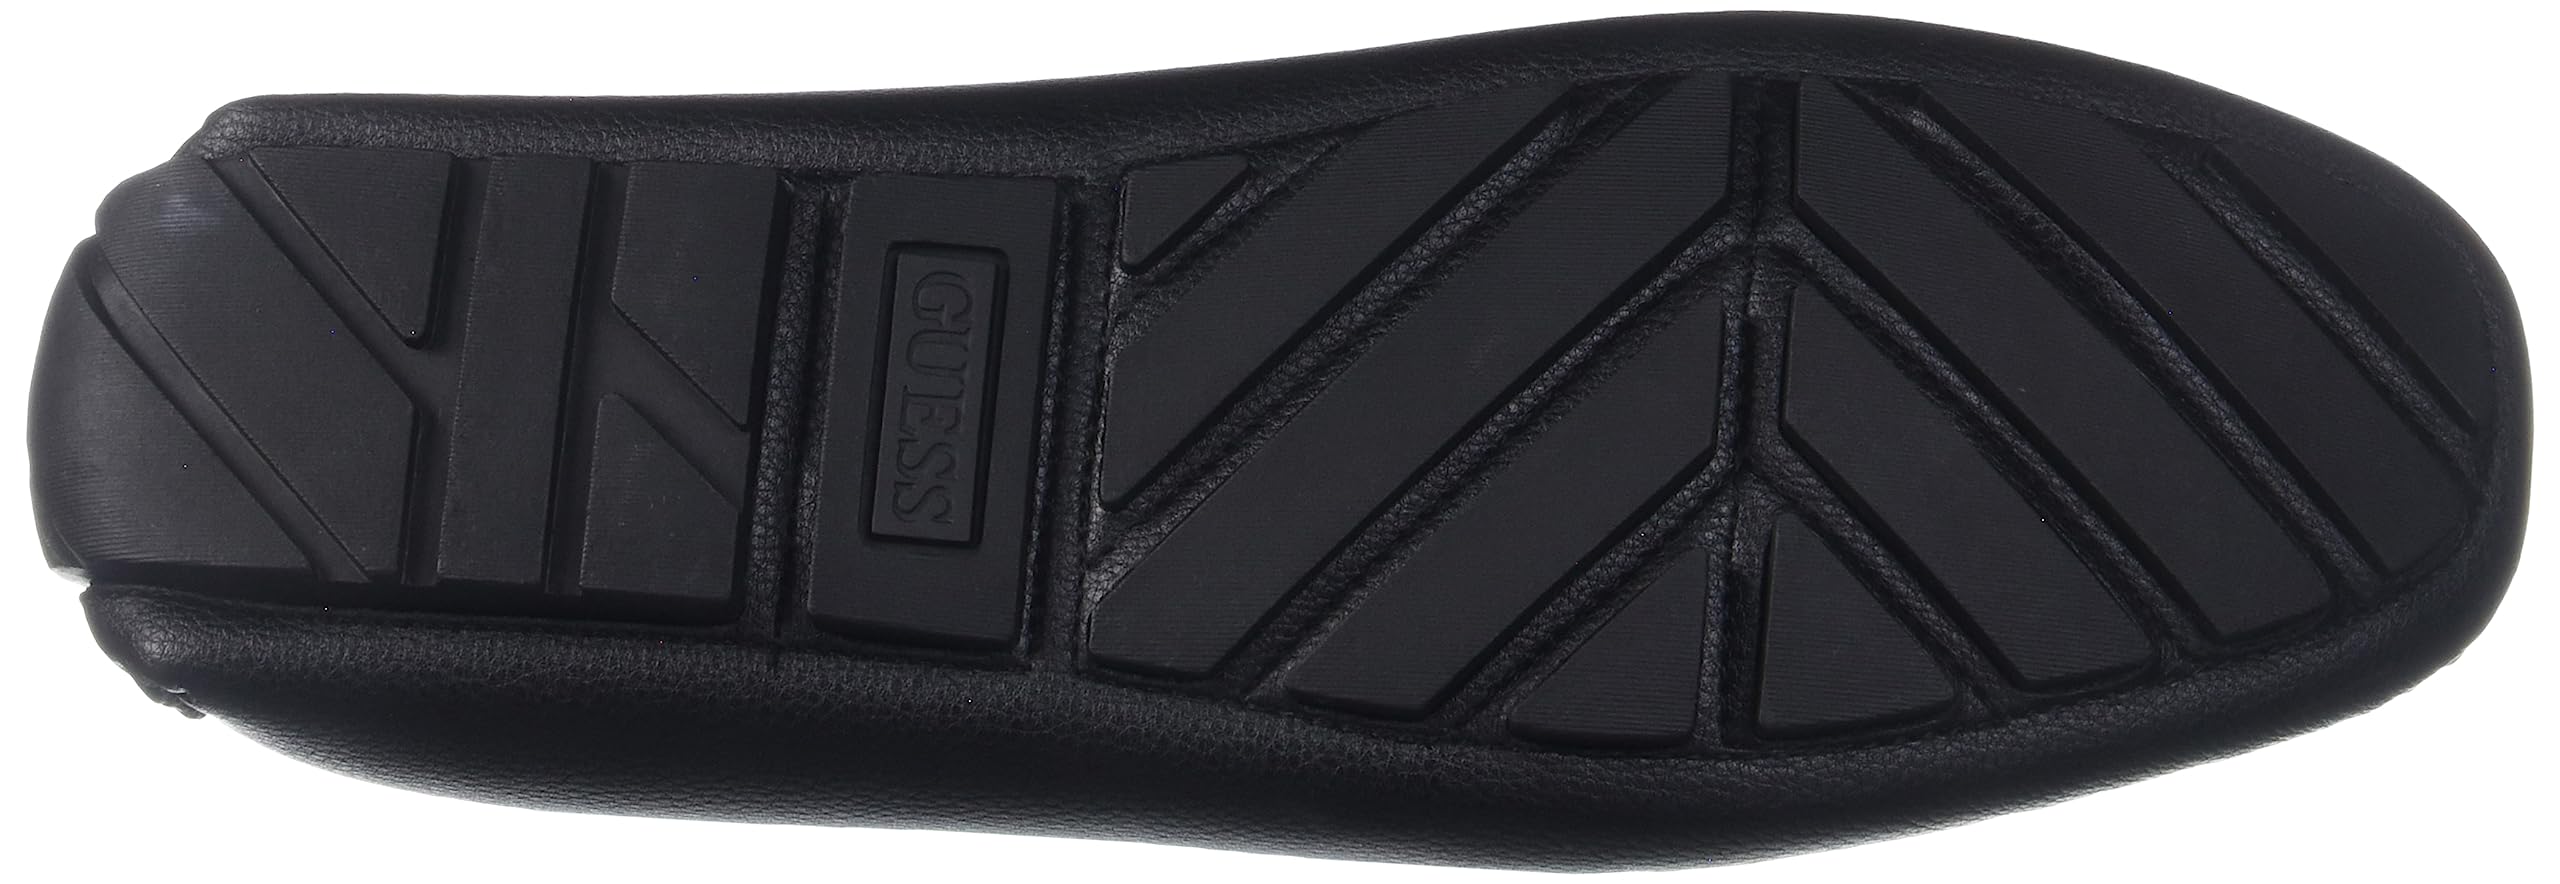 GUESS Men's Askers Loafer